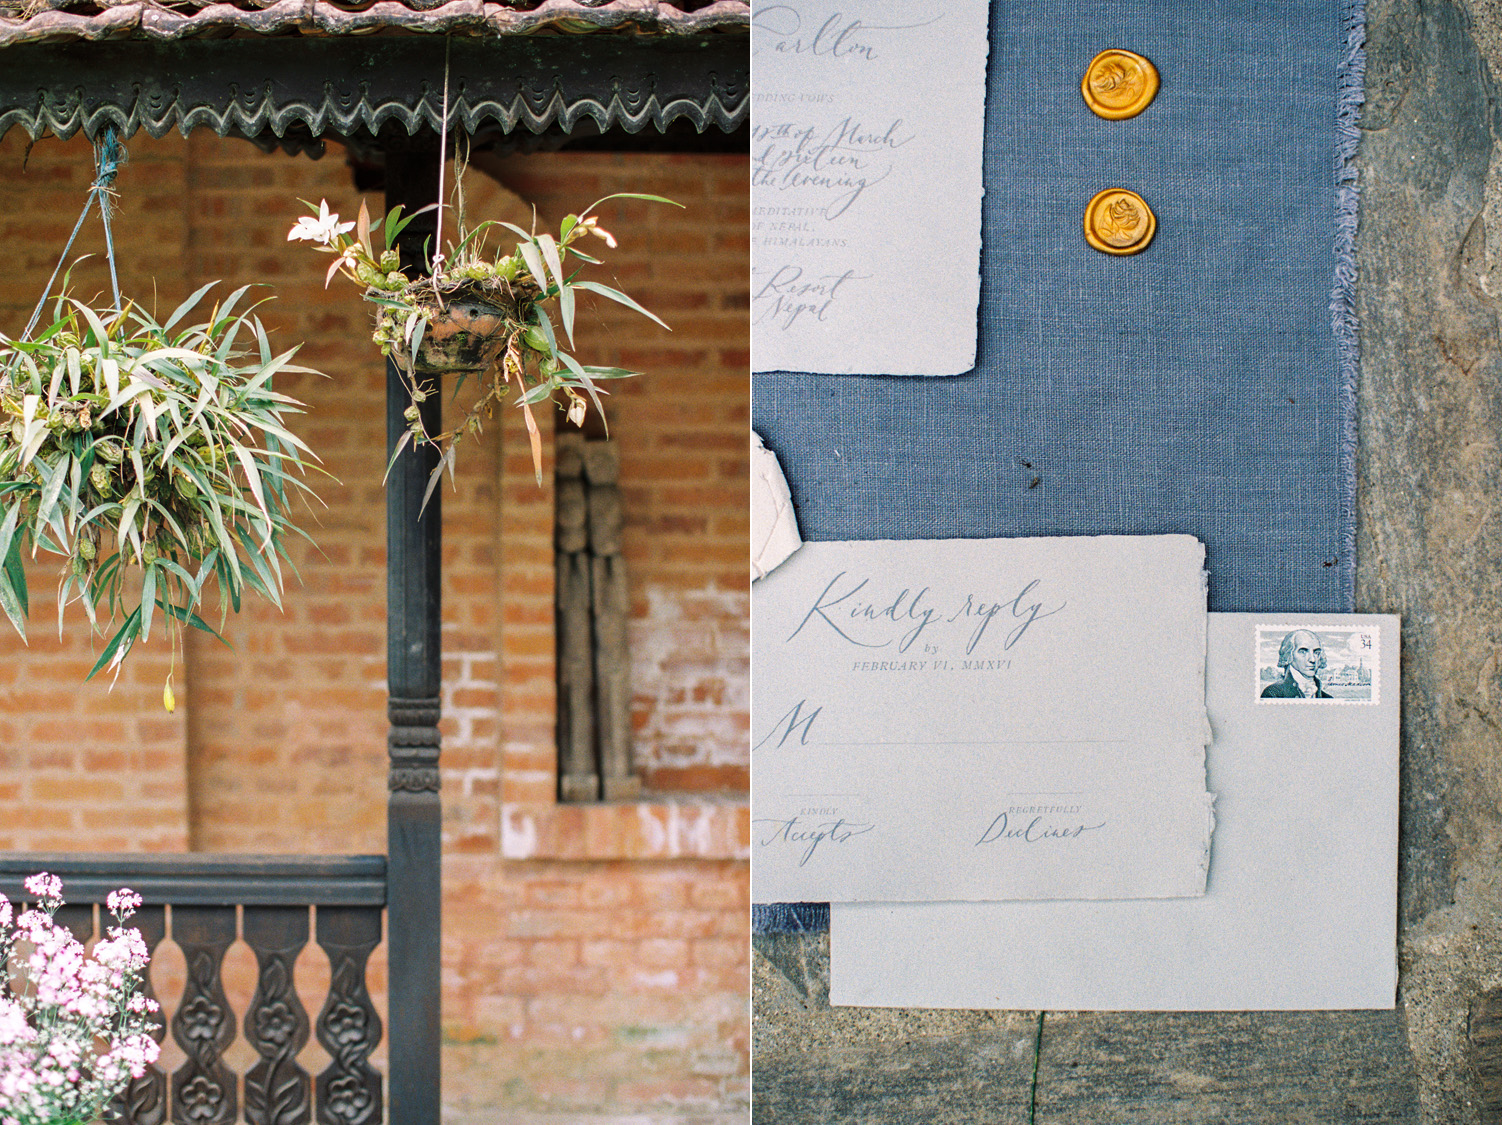 Nepal Wedding Photography with Shop Gossamer, Nina & Wes Photography & Jaclyn Journey Florals